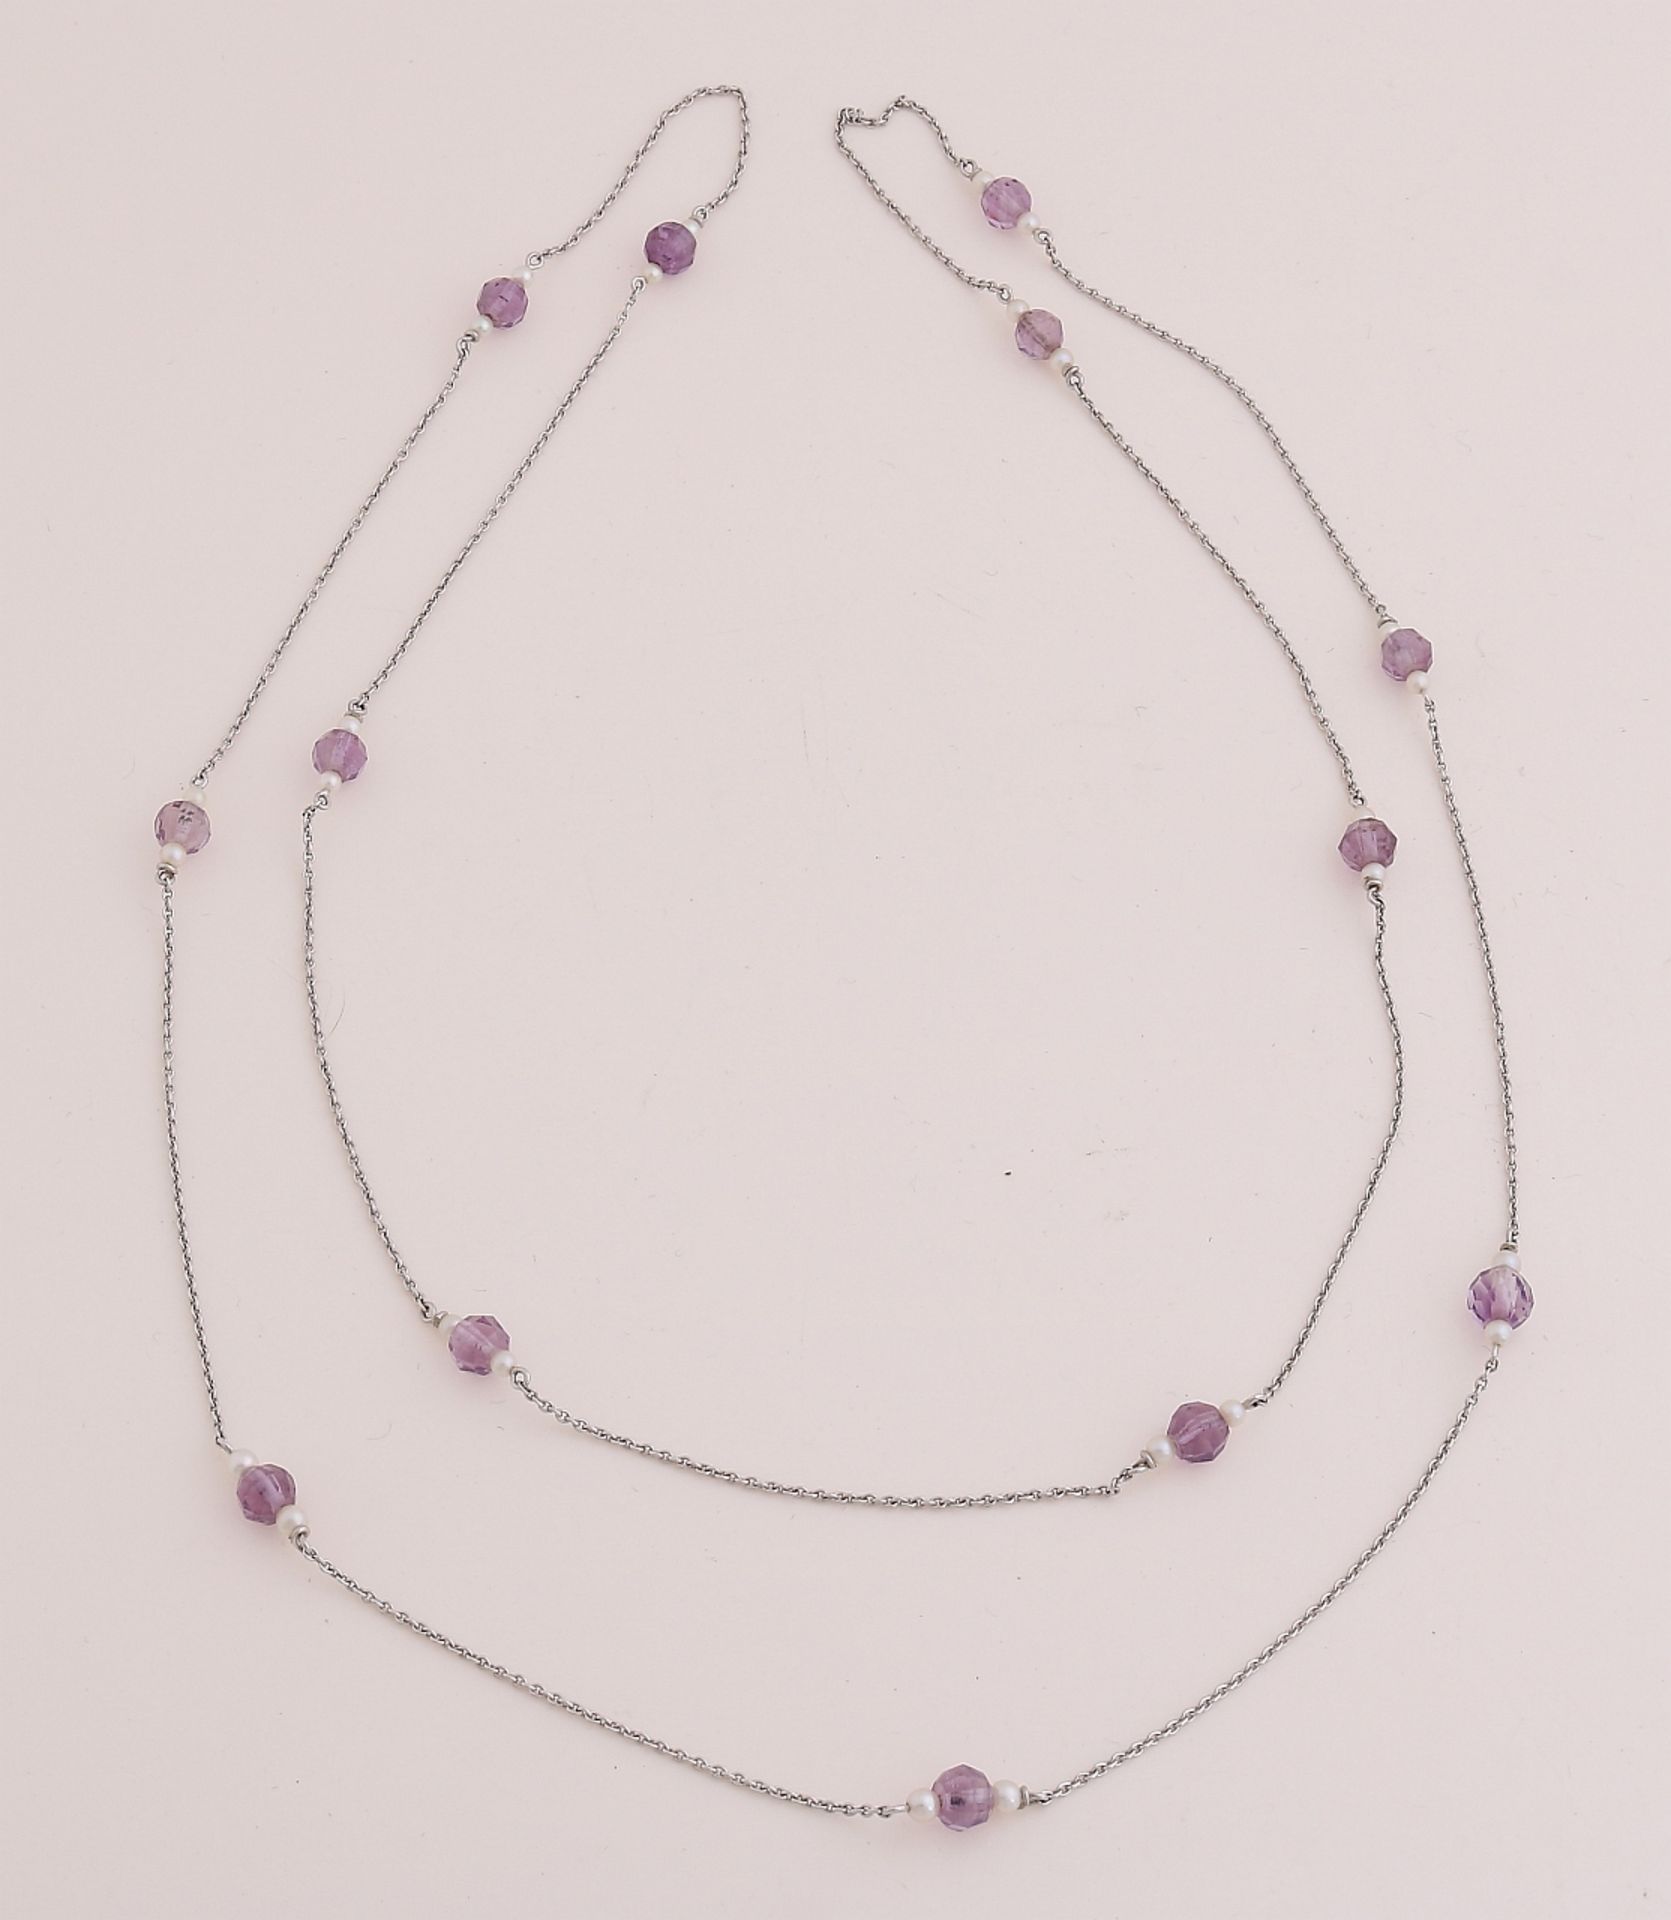 White gold necklace with amethyst